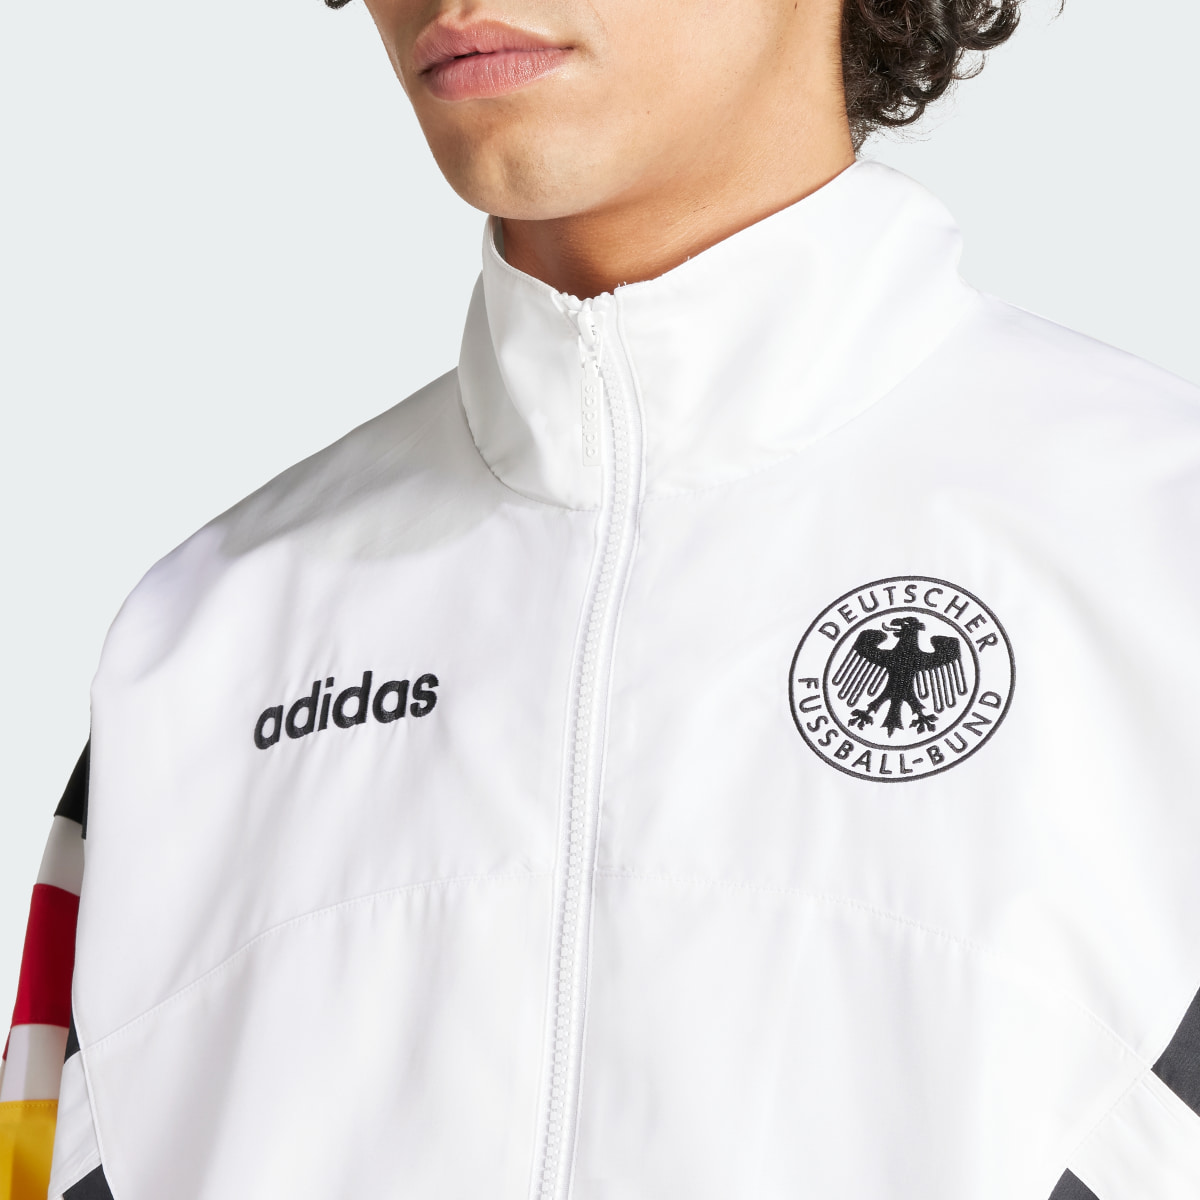 Adidas Germany 1996 Woven Track Top. 6